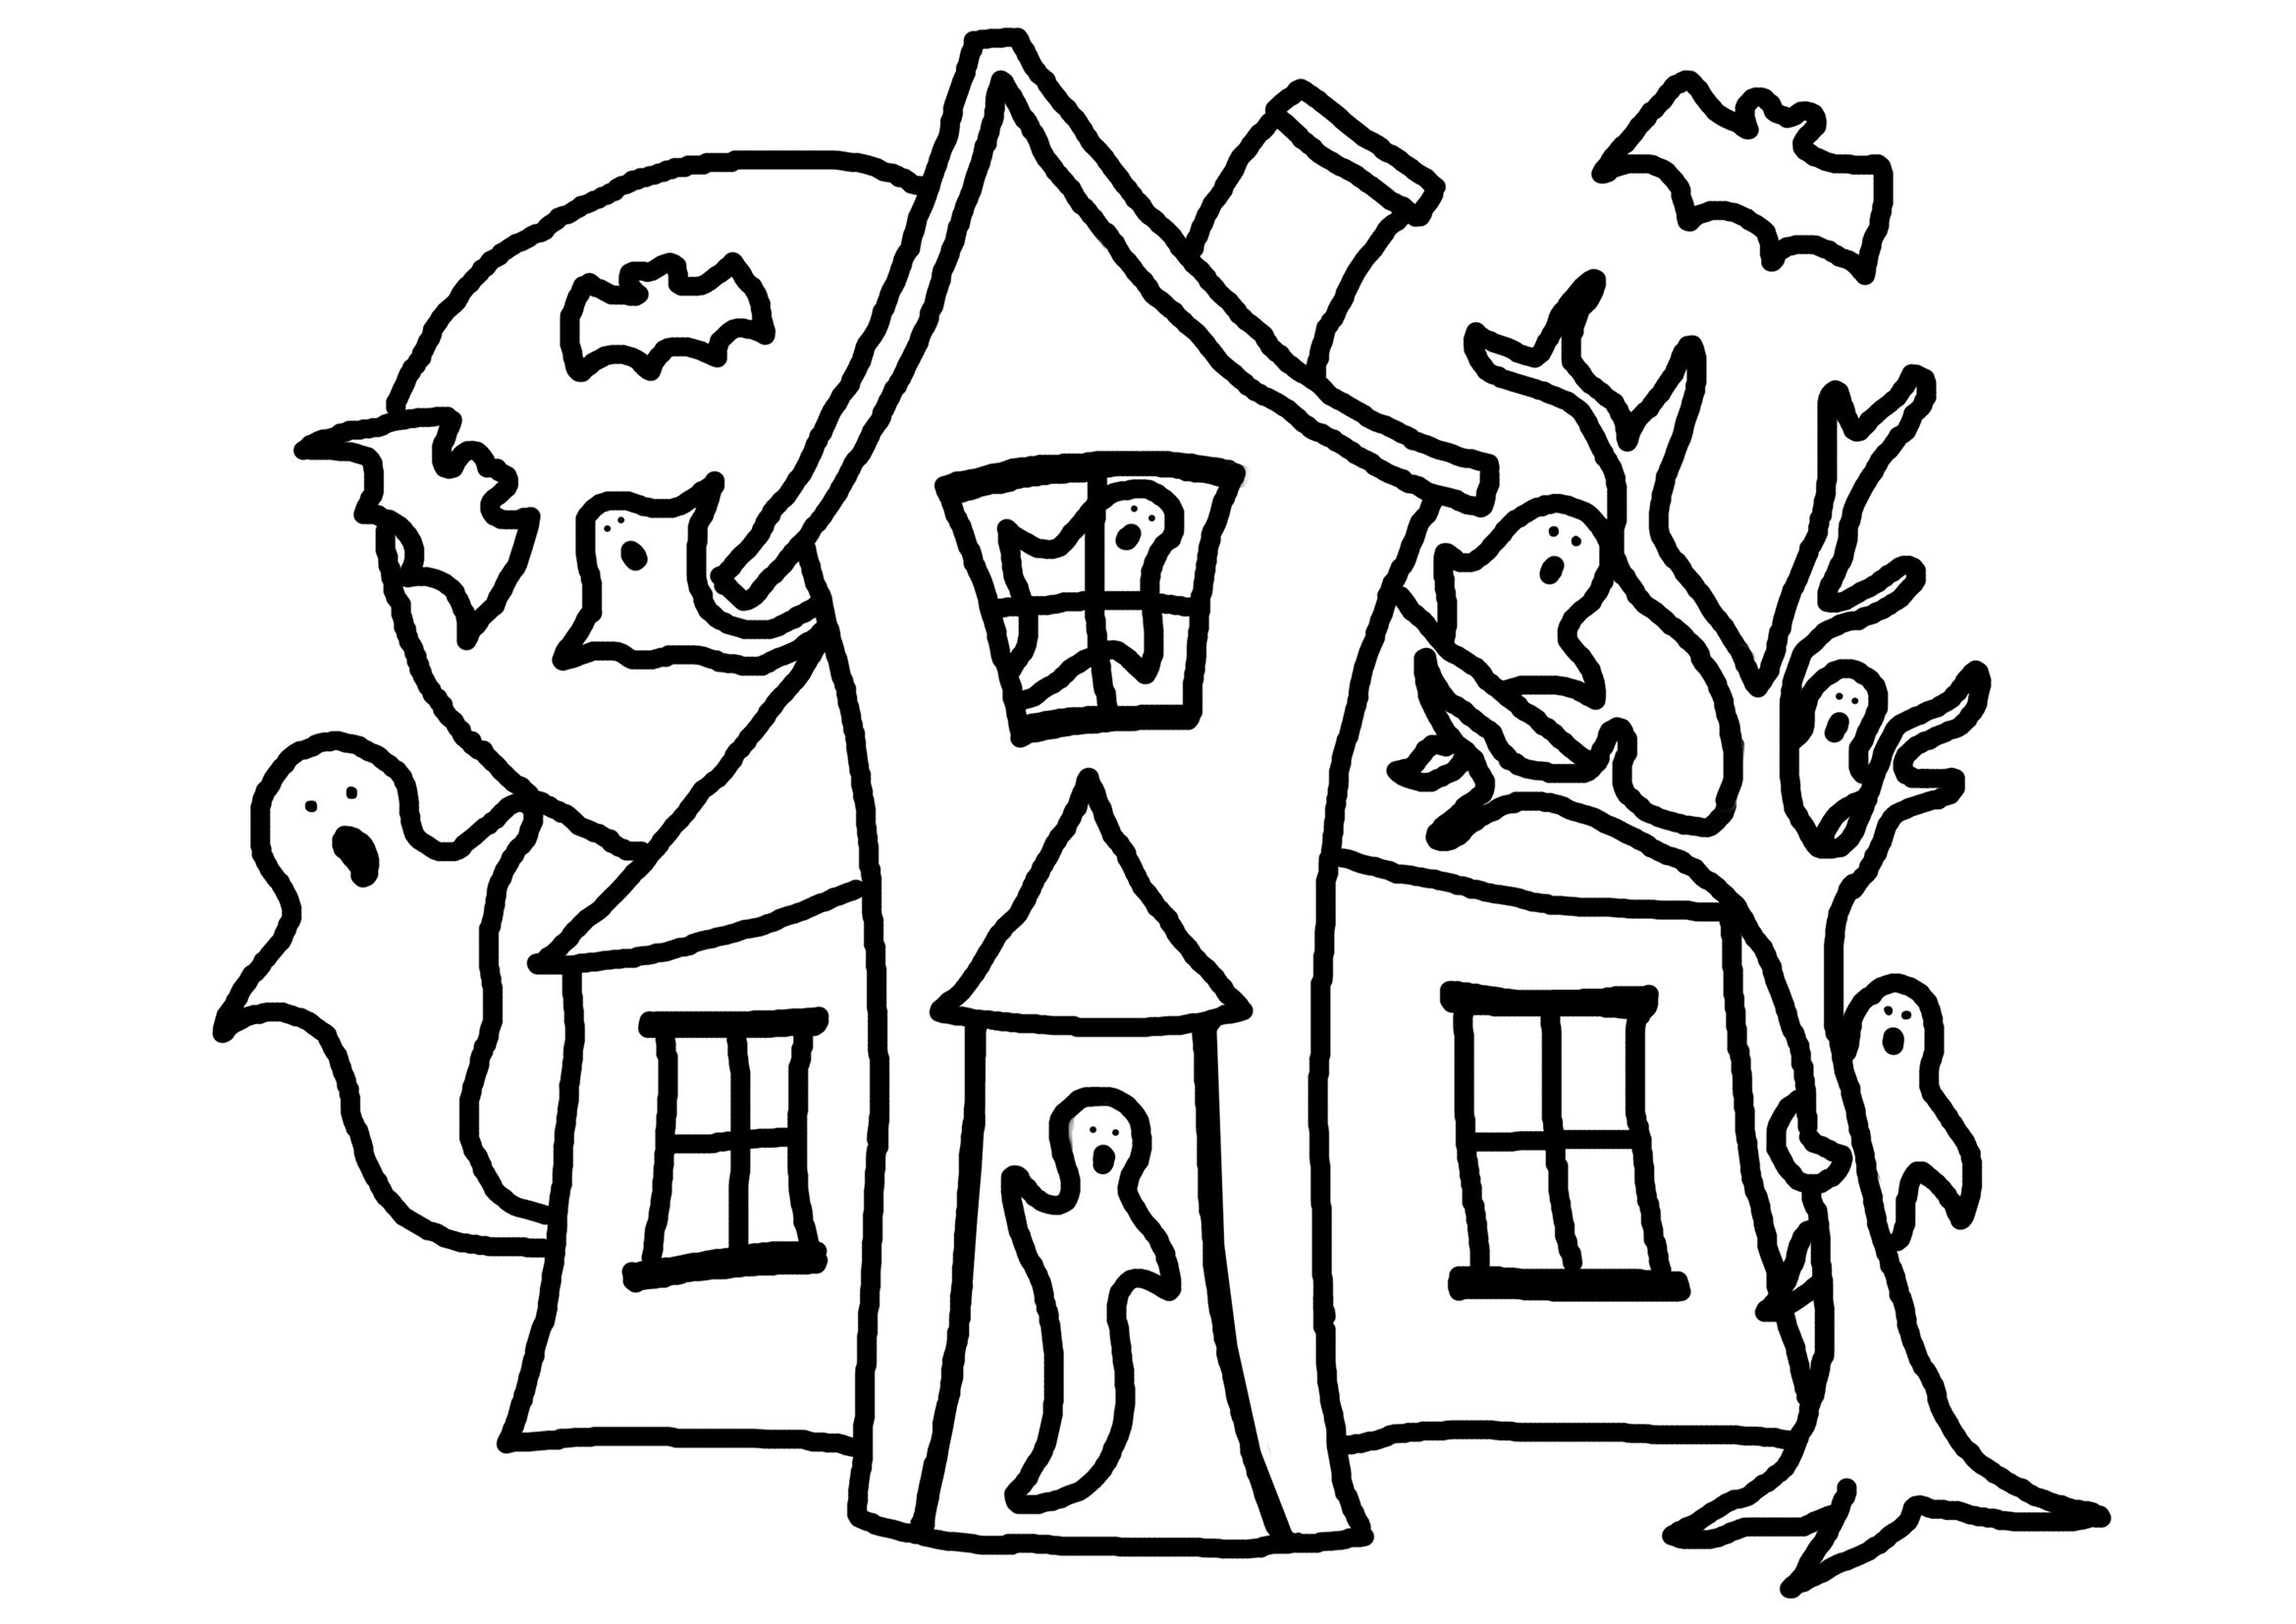 Haunted House Printable Coloring Pages Coloring Pages Halloween Haunted House Coloring Pages For Kids